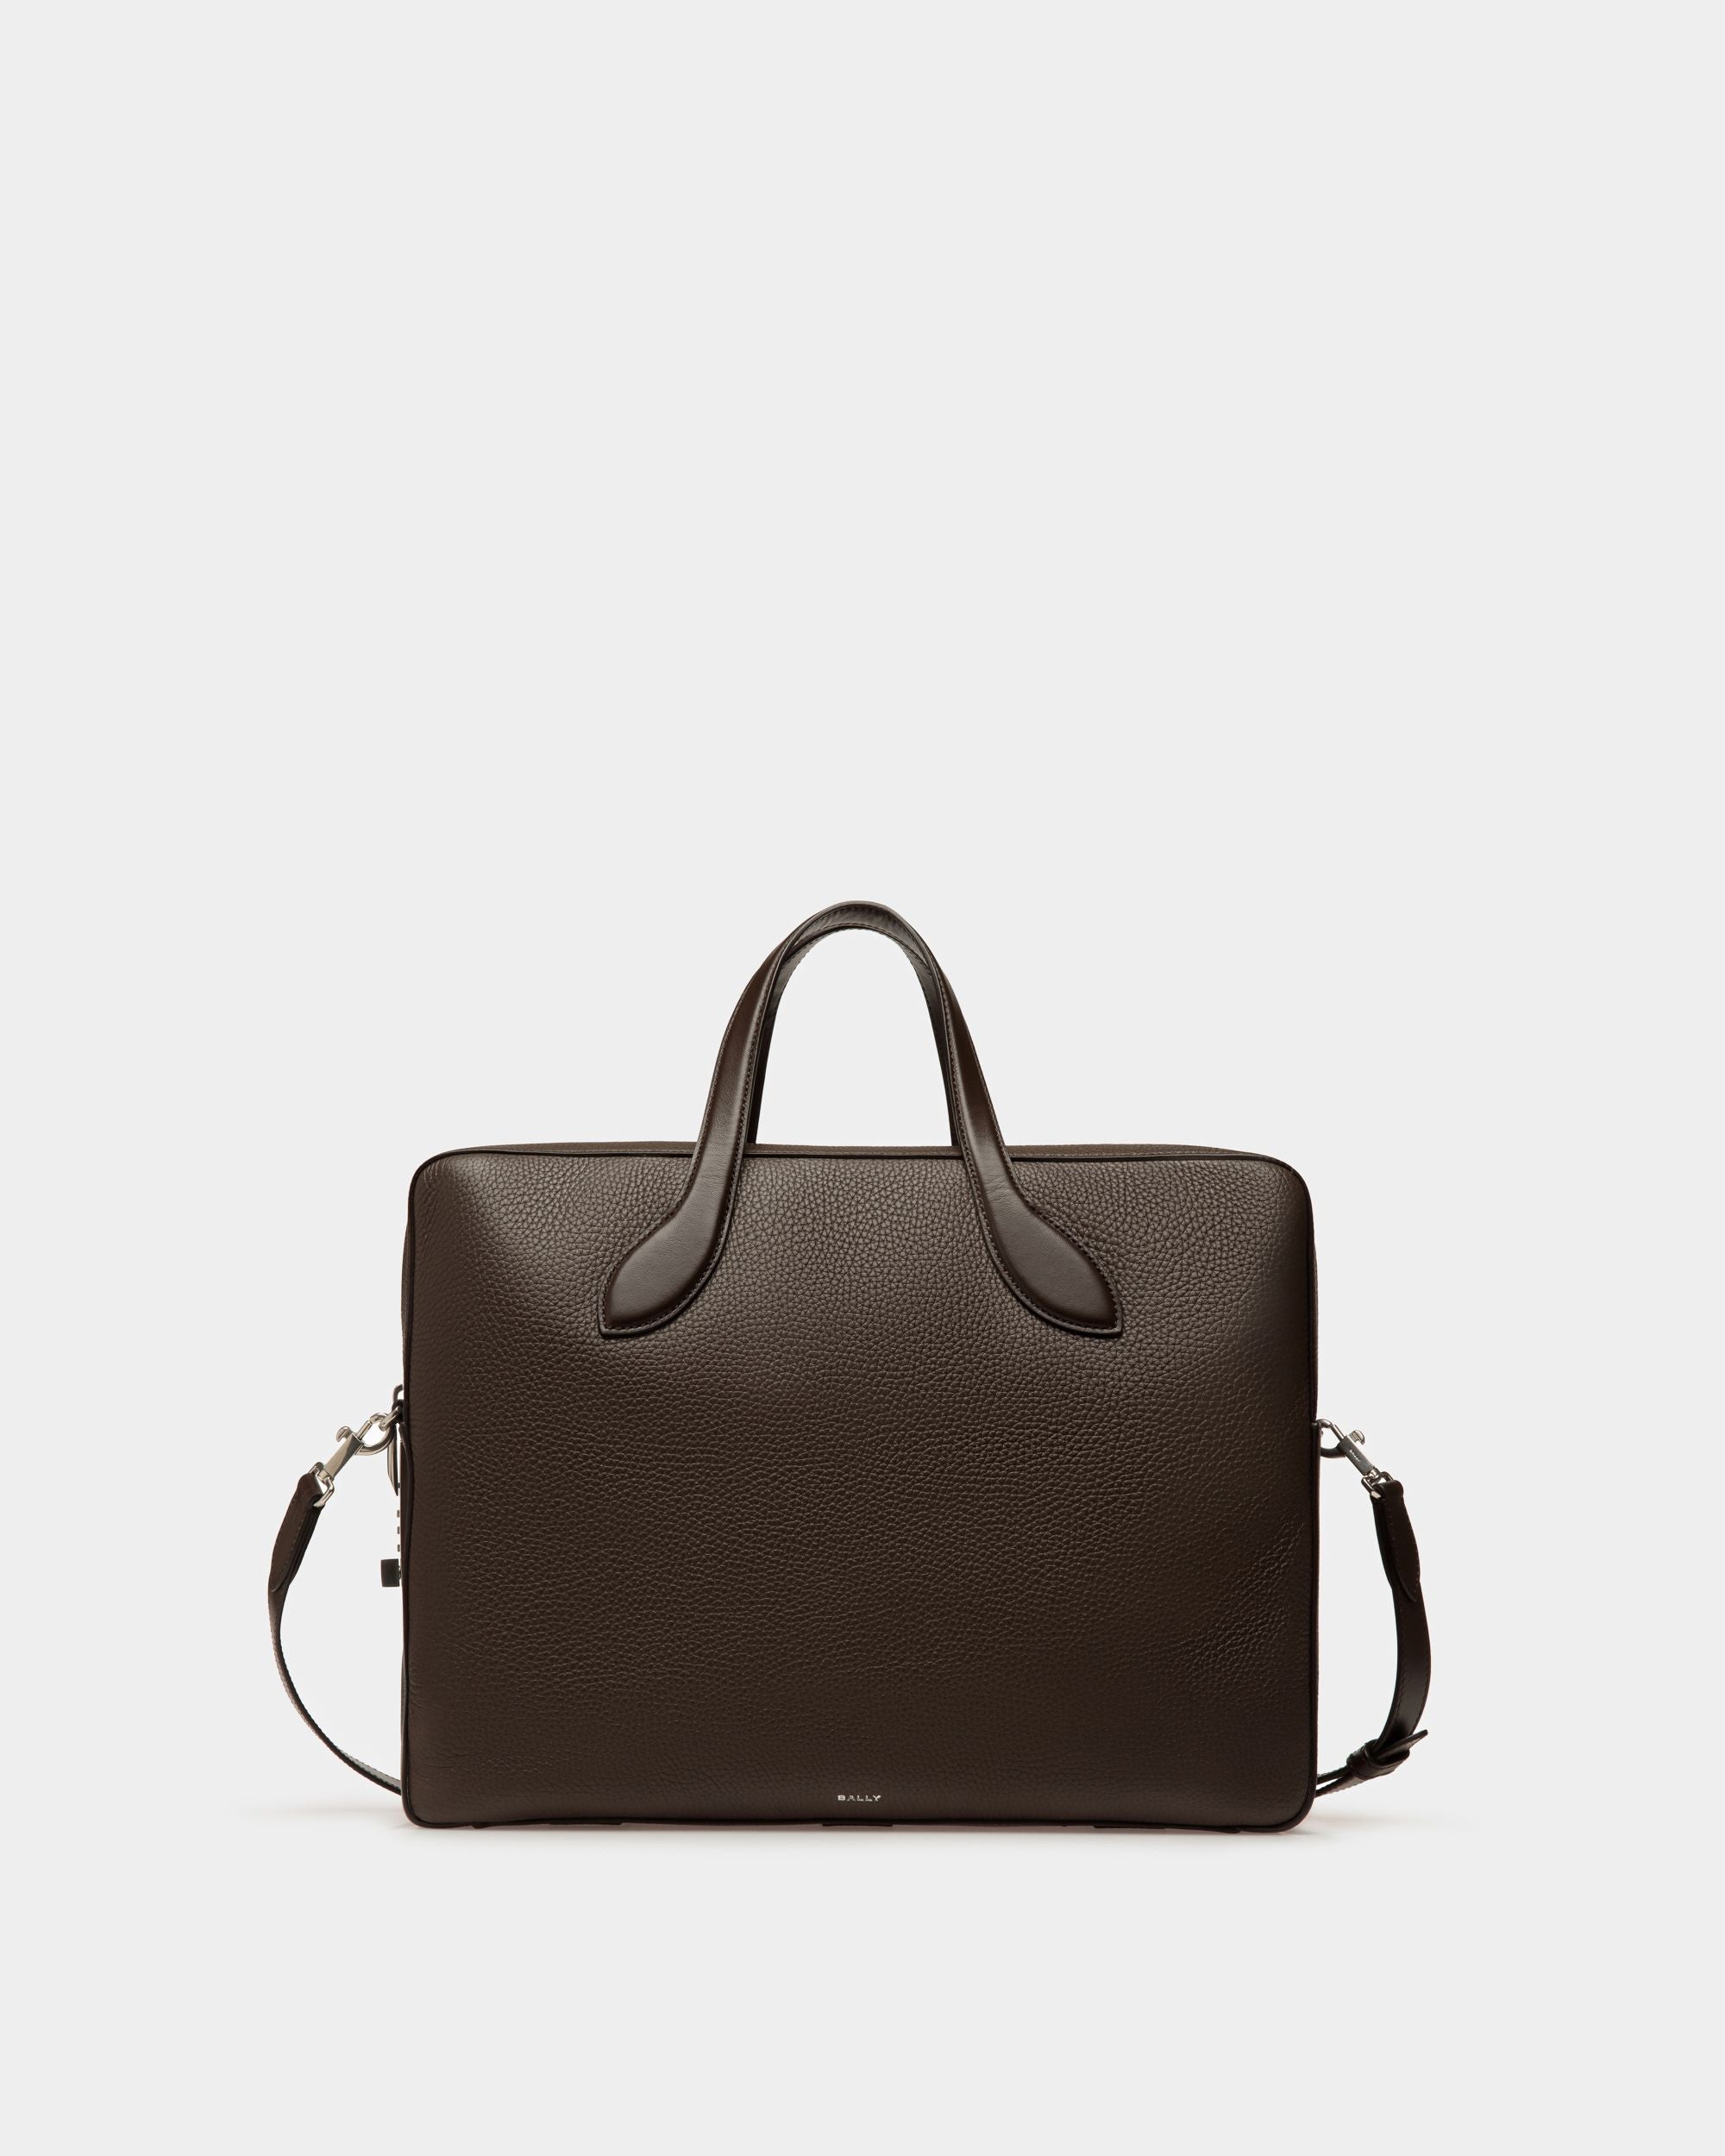 The Favorites: Men's Dresses, Shoes & Bags for gifts | Bally